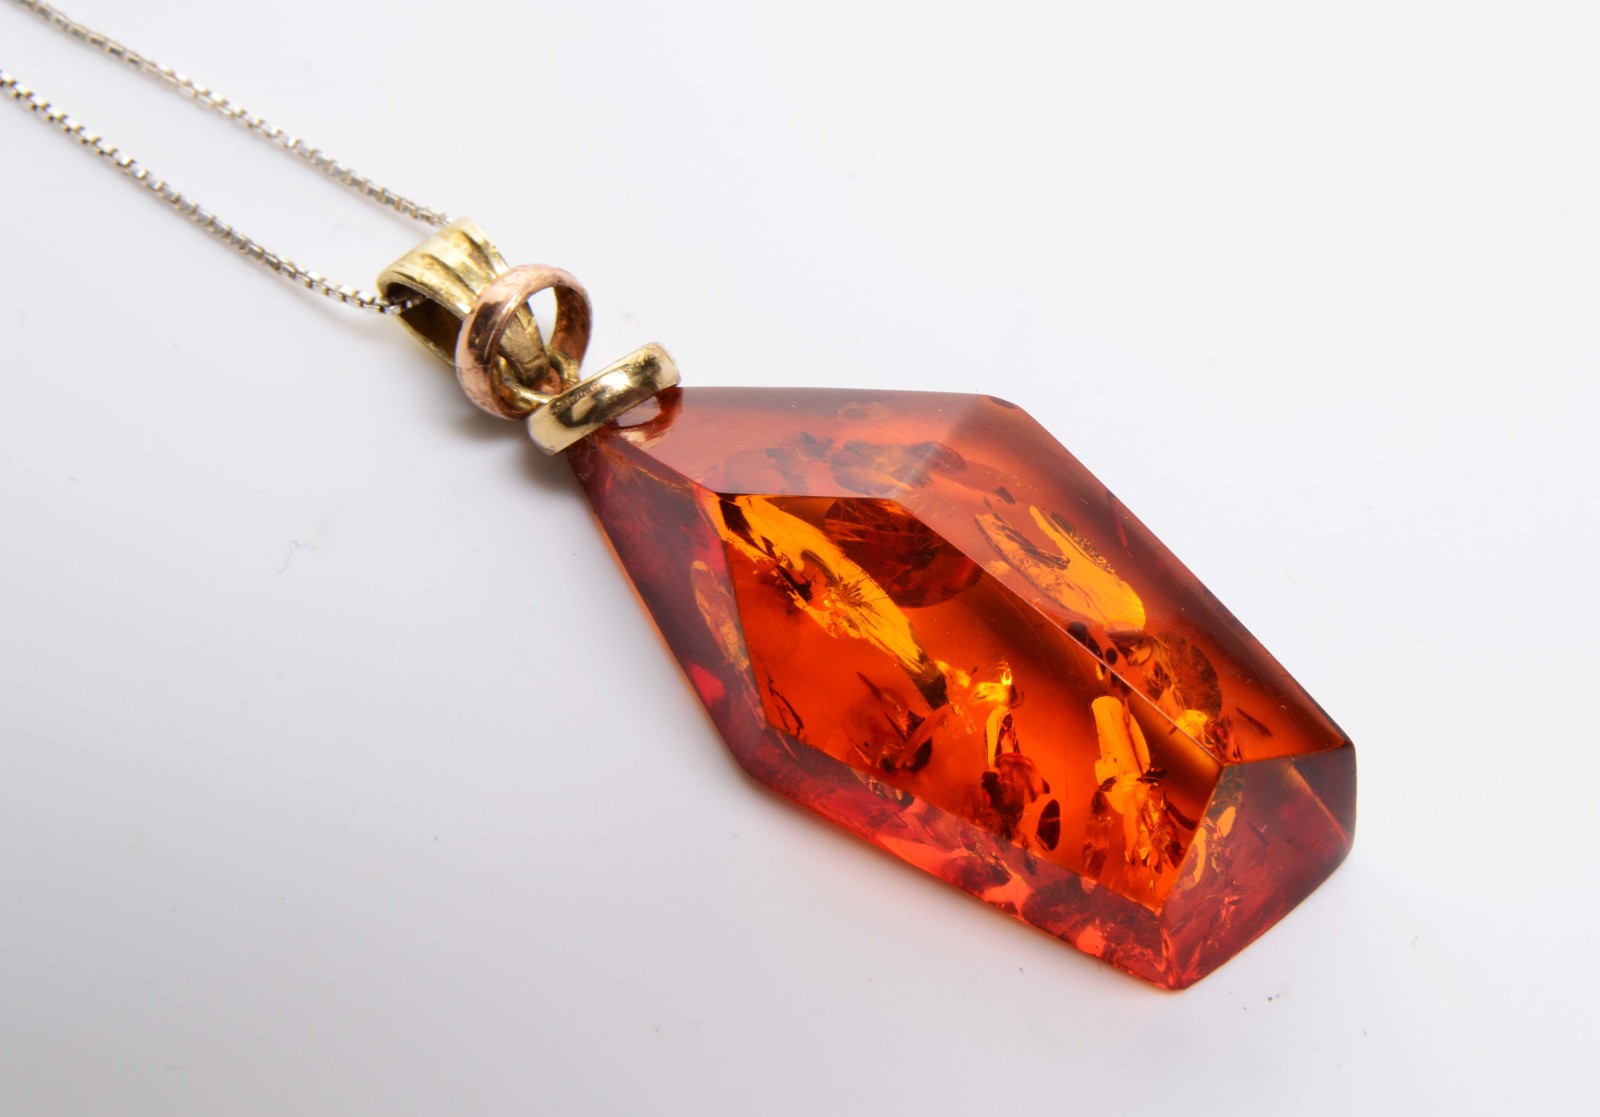 A FACET CUT AMBER PENDANT with an inset inclusion, 4cm in length, mounted on a silver chain